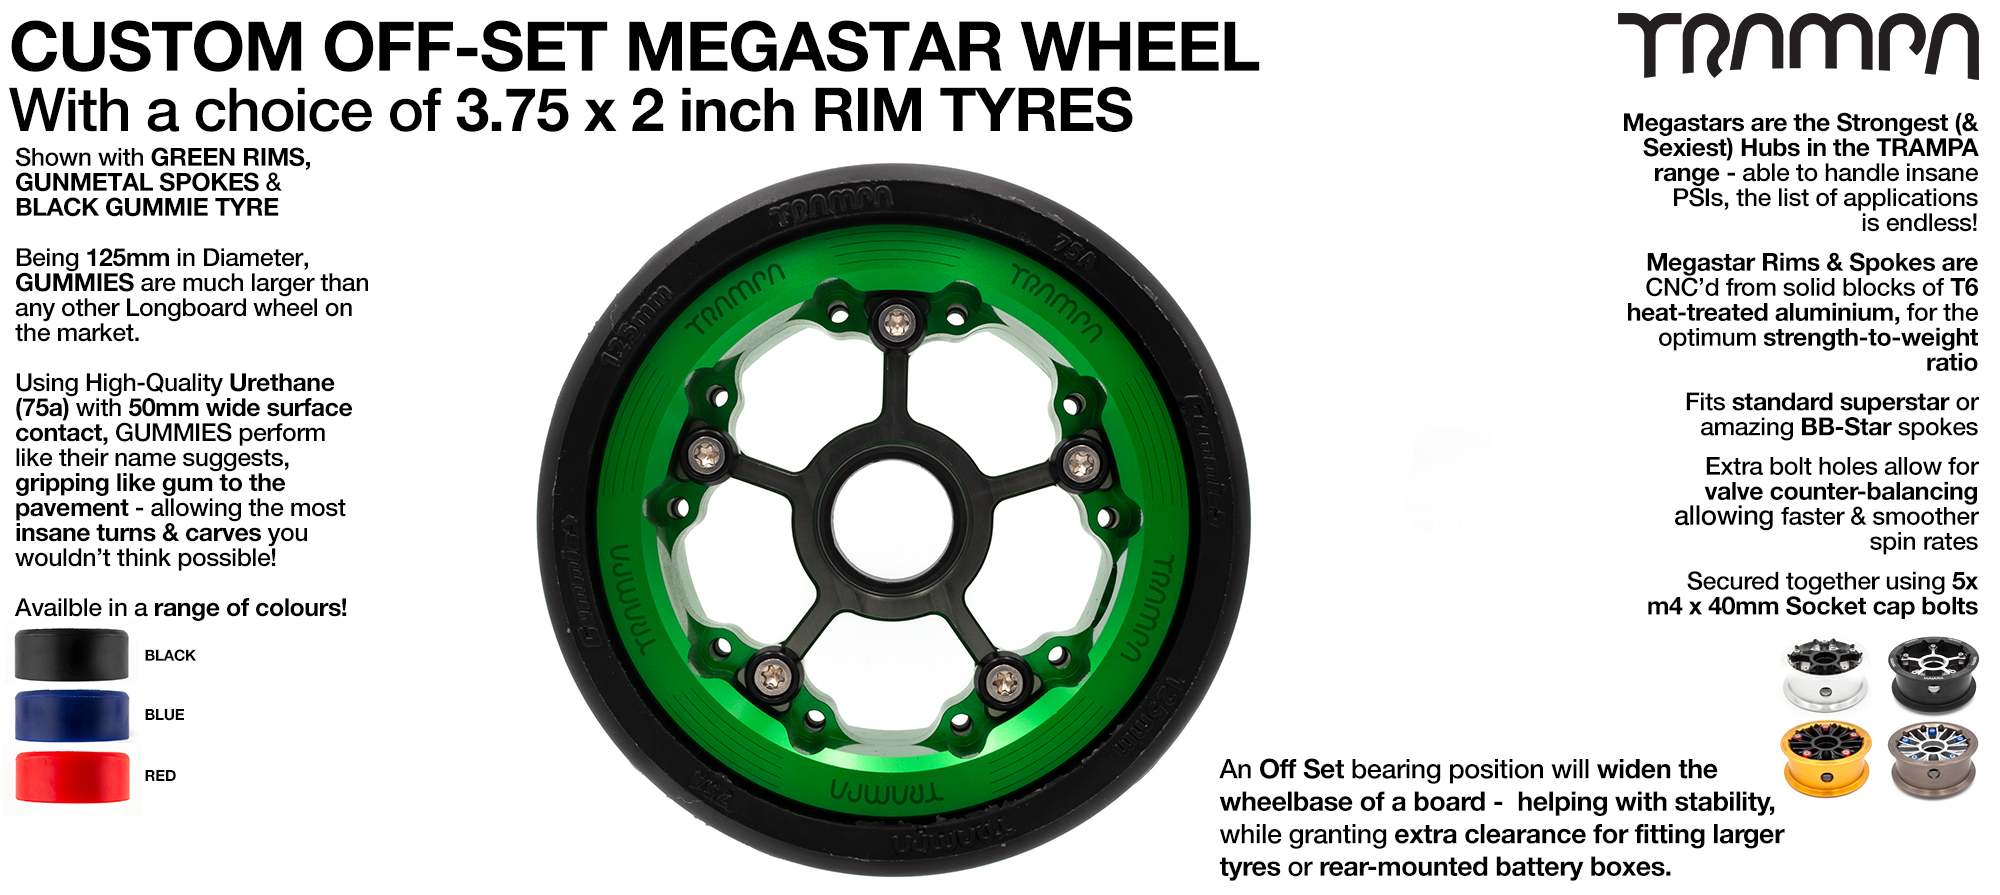 OFF-SET MEGASTAR 8 Wheel 3.75 x 2 Inch - Fits all TRAMPA Tyres up to 8 Inch